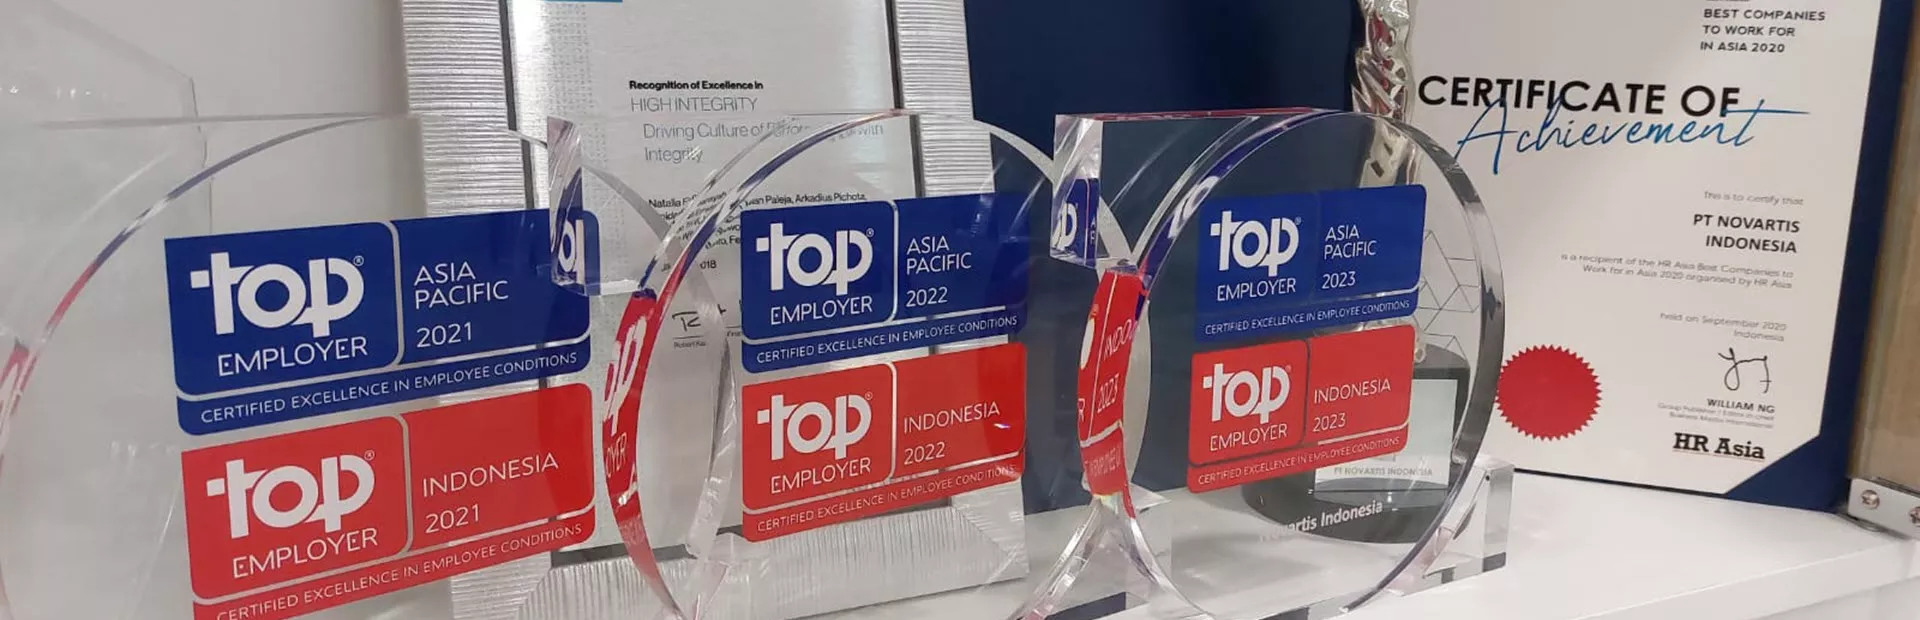 Top Employer Indonesia 2021 2022 2023 awards